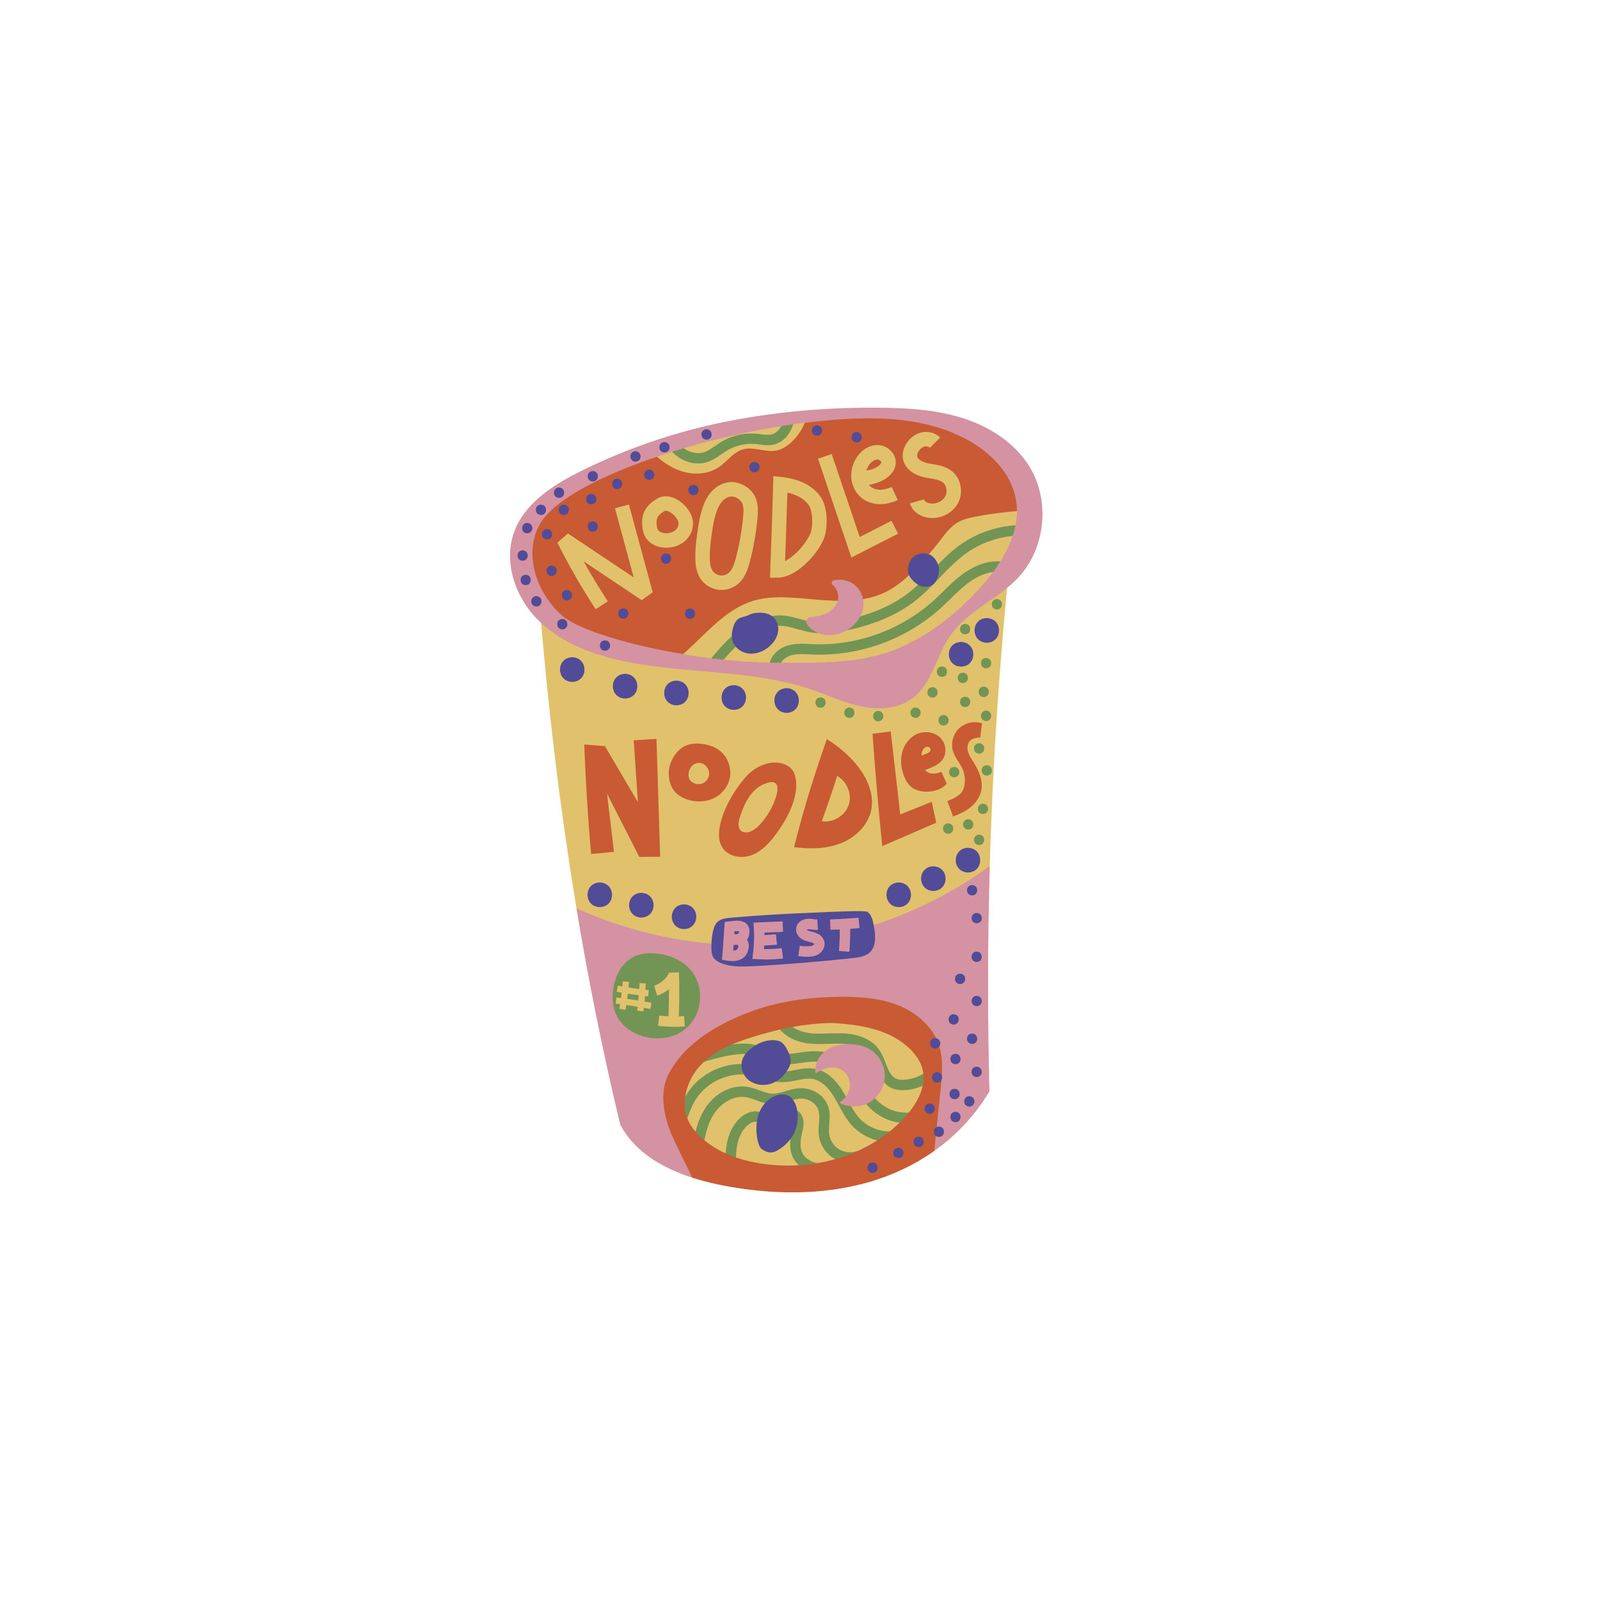 Instant noodles in a cup illustration. Colorful clipart of dry ramen packaging, isolated on white background